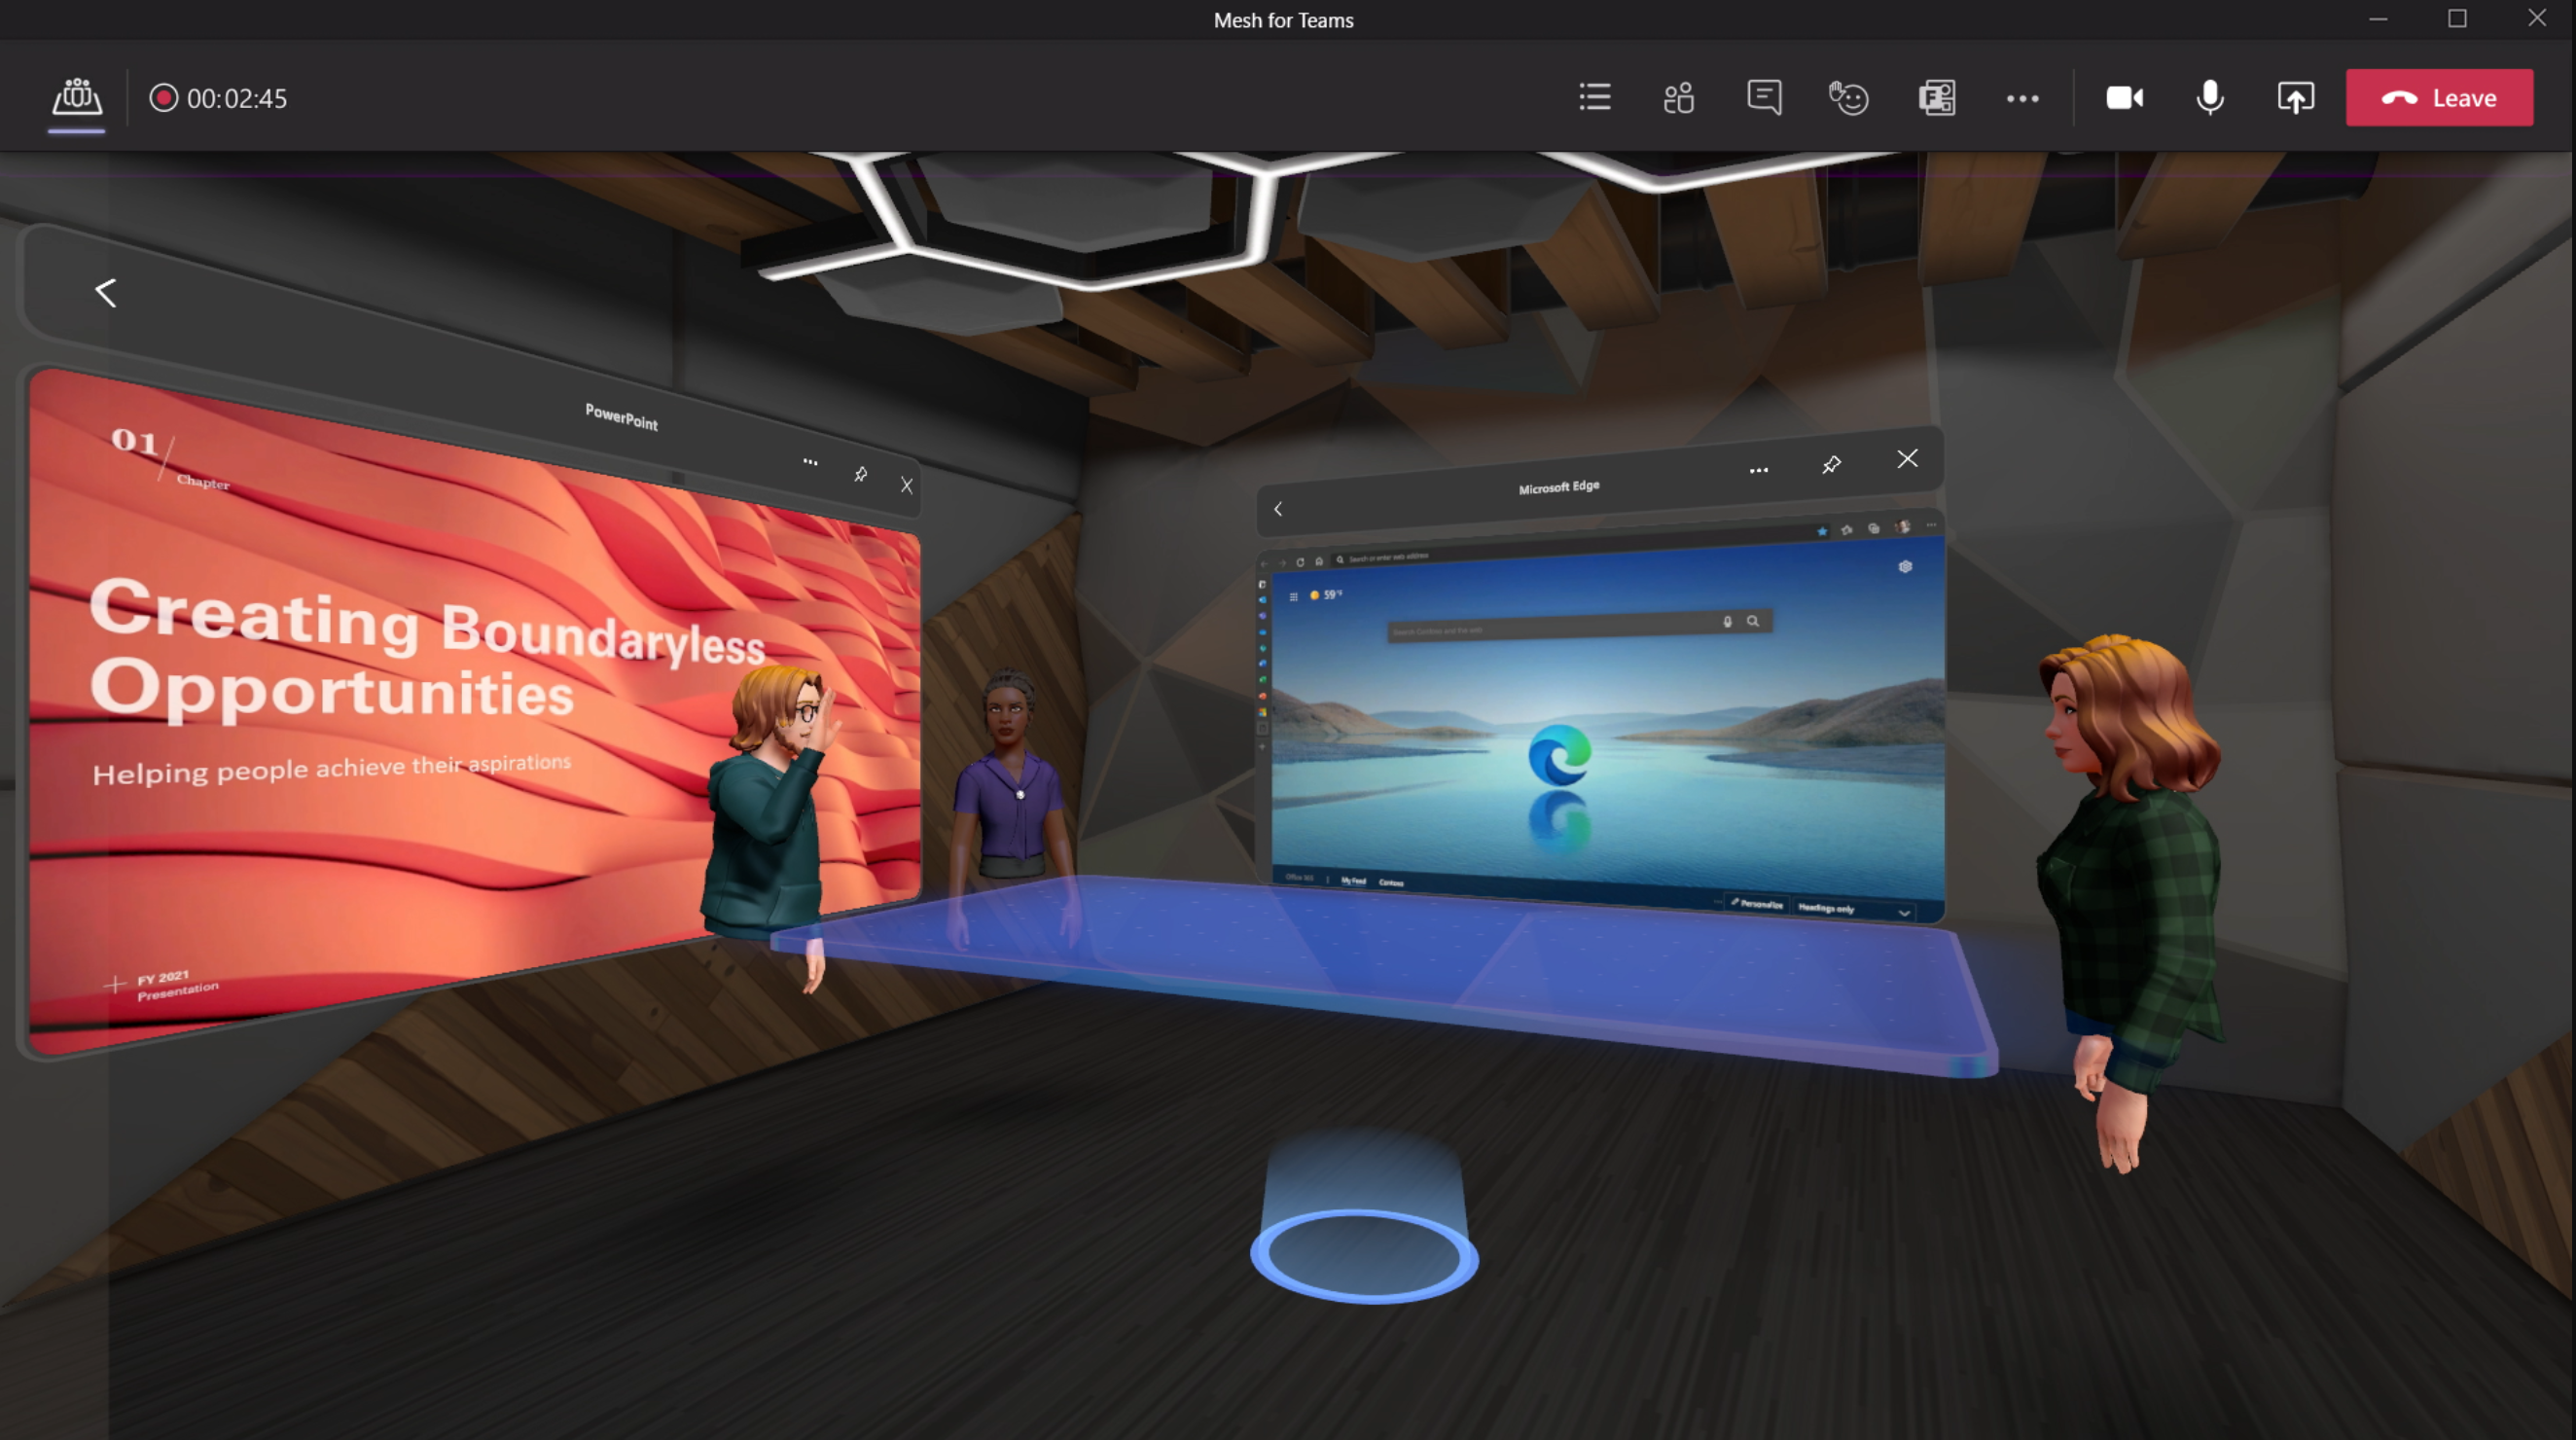 with mesh for teams, microsoft plans to bring 3d workspaces to remote workers in 2022 | ars technica